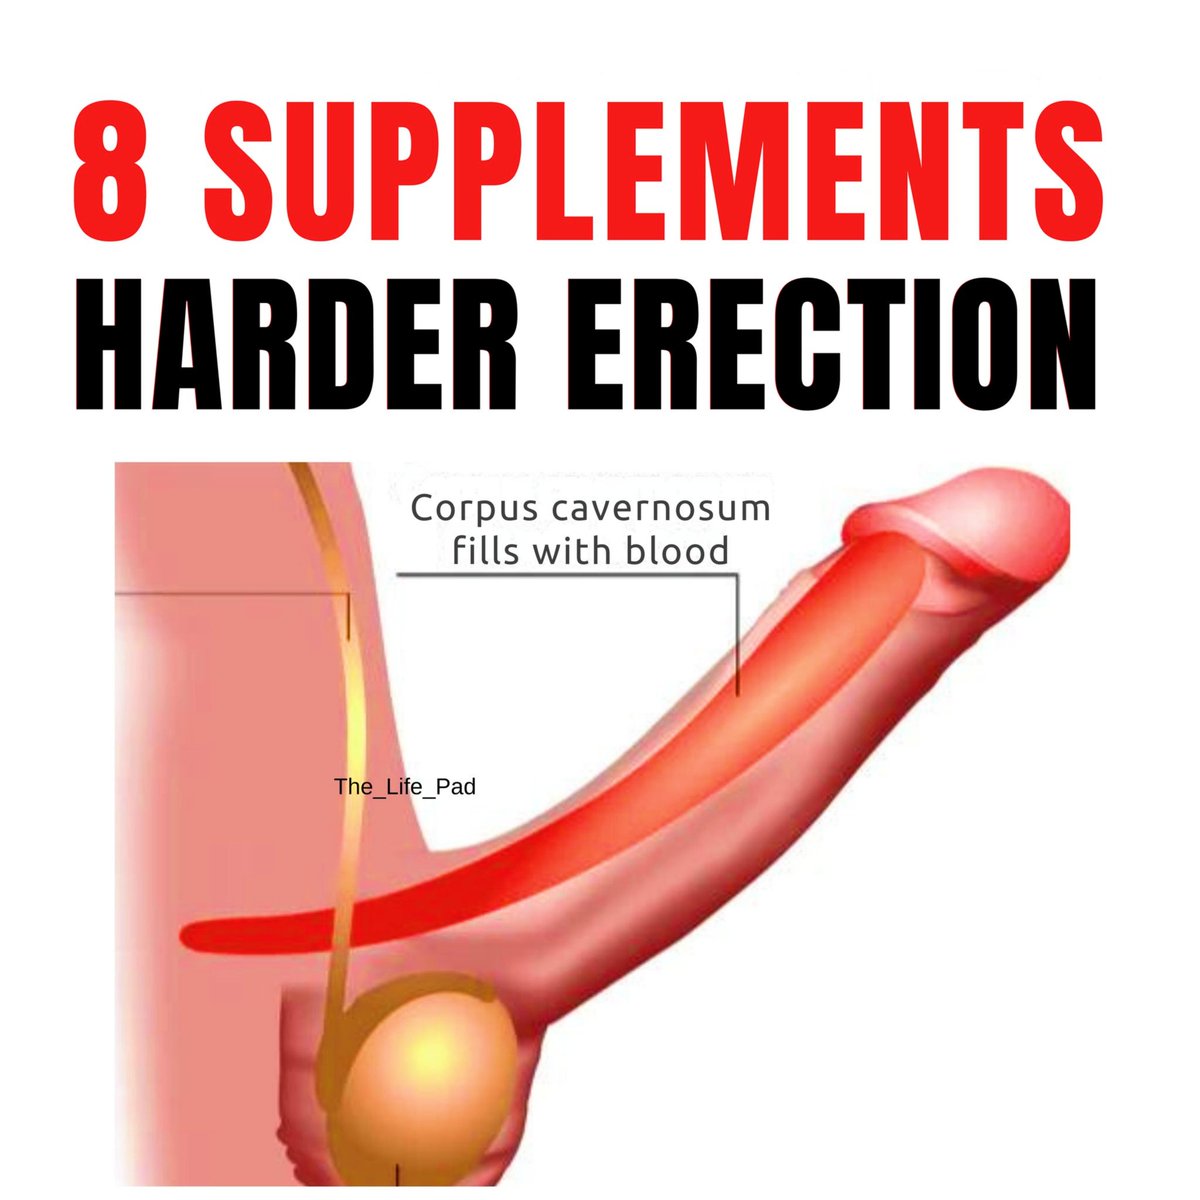 8 Supplements To Get Harder & and Performance Even Better In Bed:  🍆

(educational purpose)